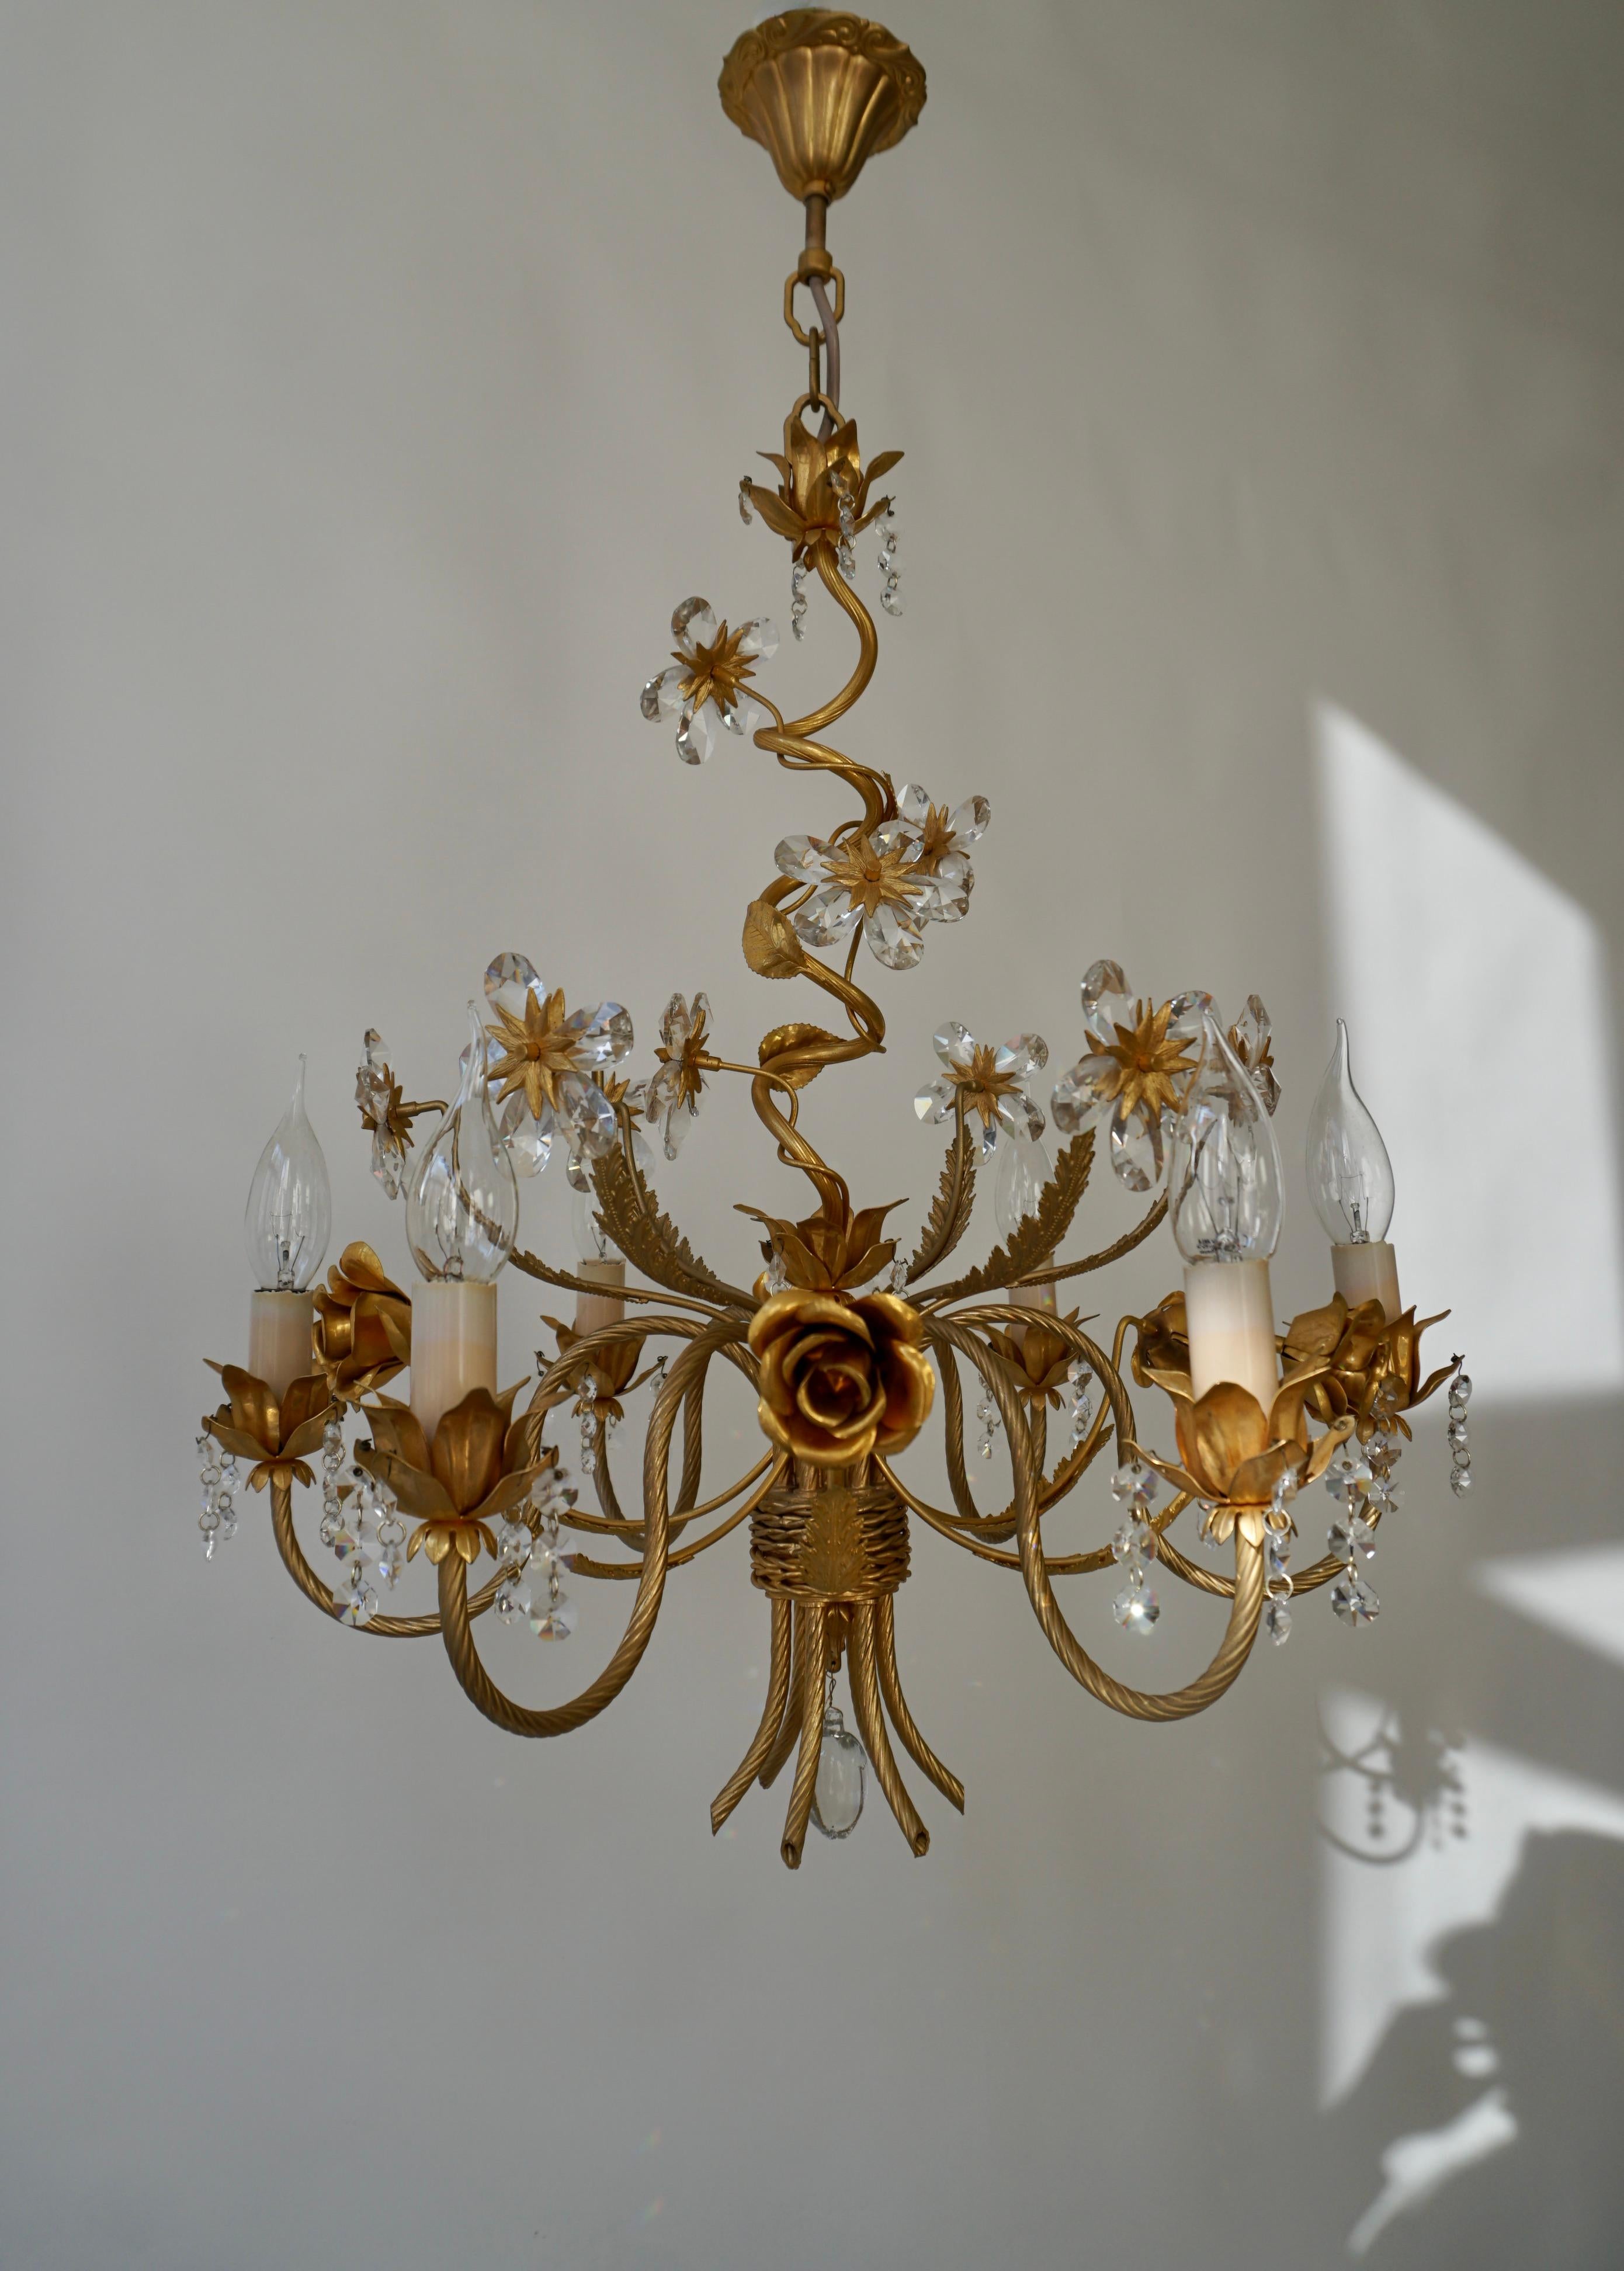 A beautiful elegant chandelier with Crystal flowers and gilded roses.

A Hollywood Regency six-armed chandelier from Italy manufactured in the mid-century (1960s and 1970s). The chandelier has six sockets for small incandescent lamps with screw base